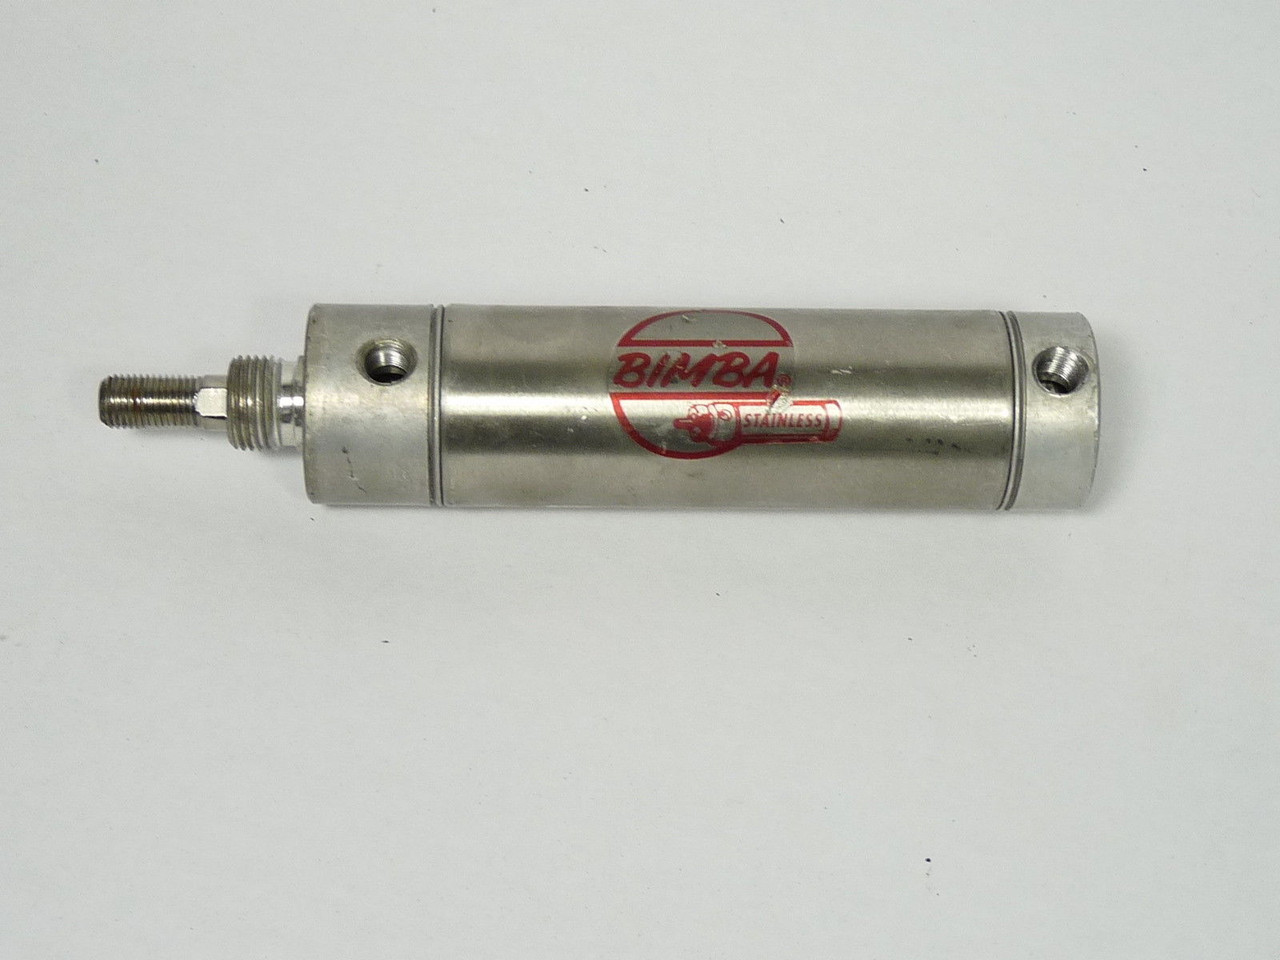 Bimba C-173-D Double Acting Pneumatic Cylinder 1-1/2" Bore 3" Stroke USED